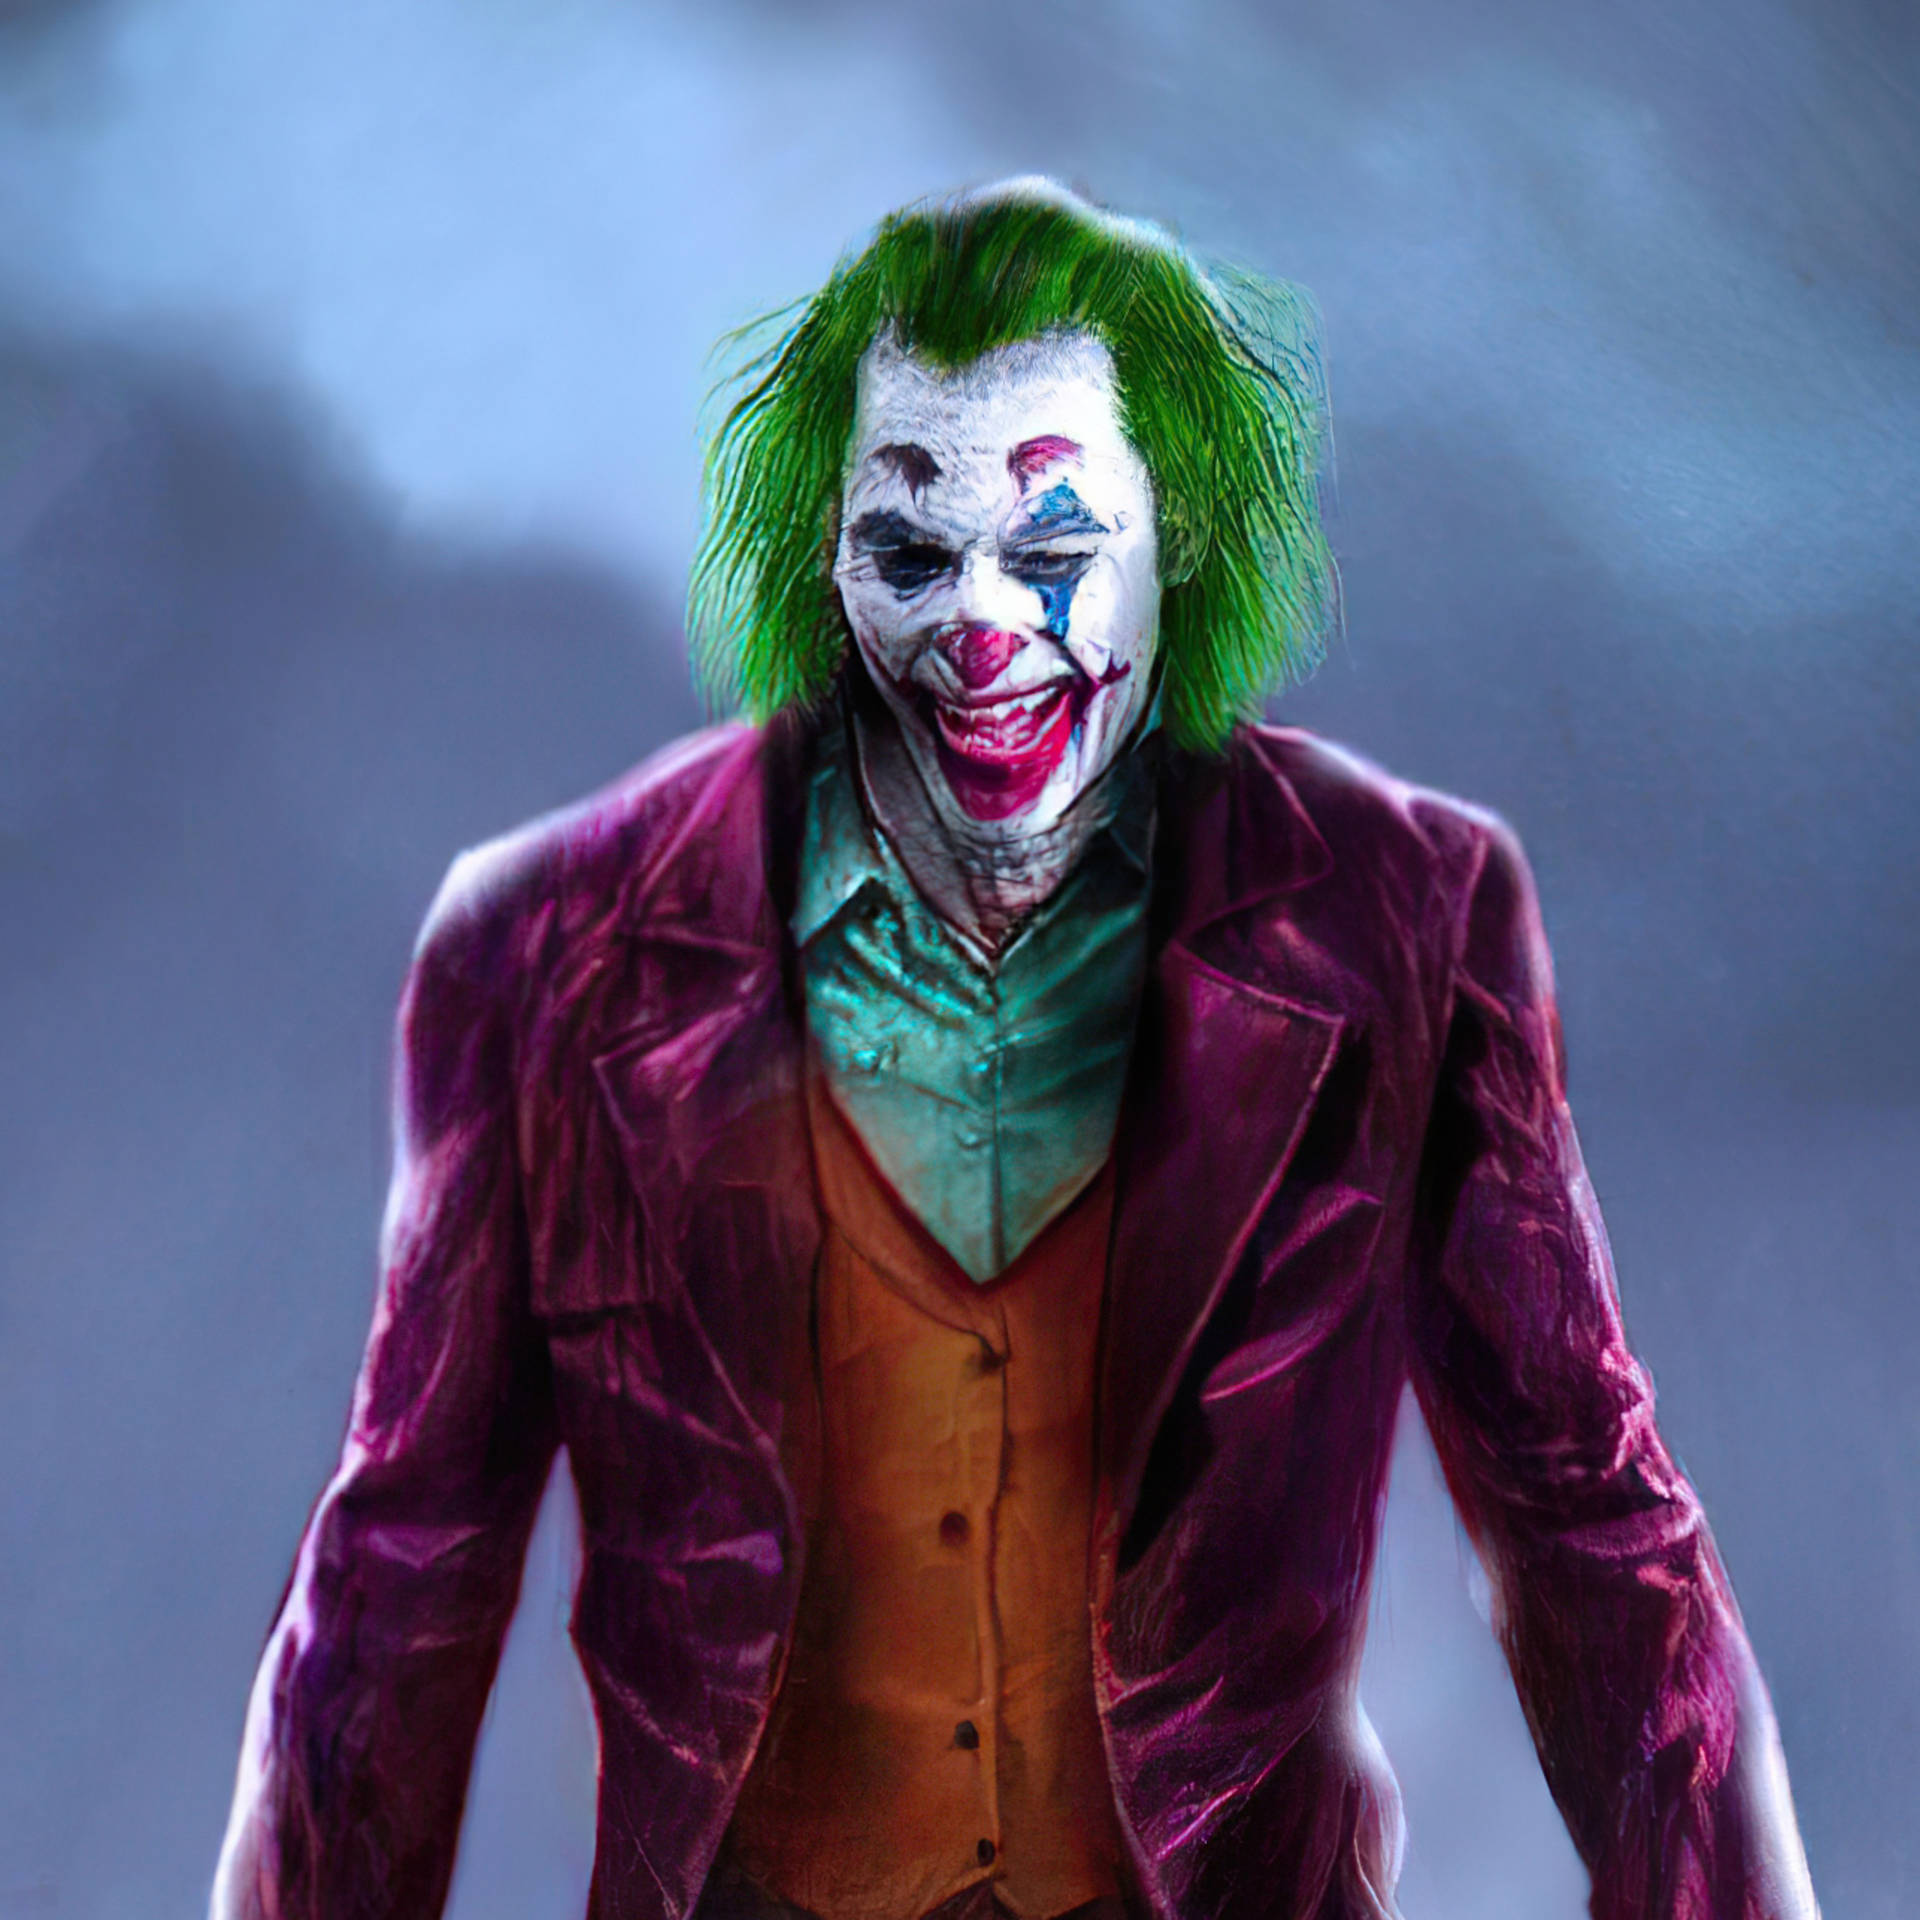 "Joker takes on the competition in PUBG!" Wallpaper